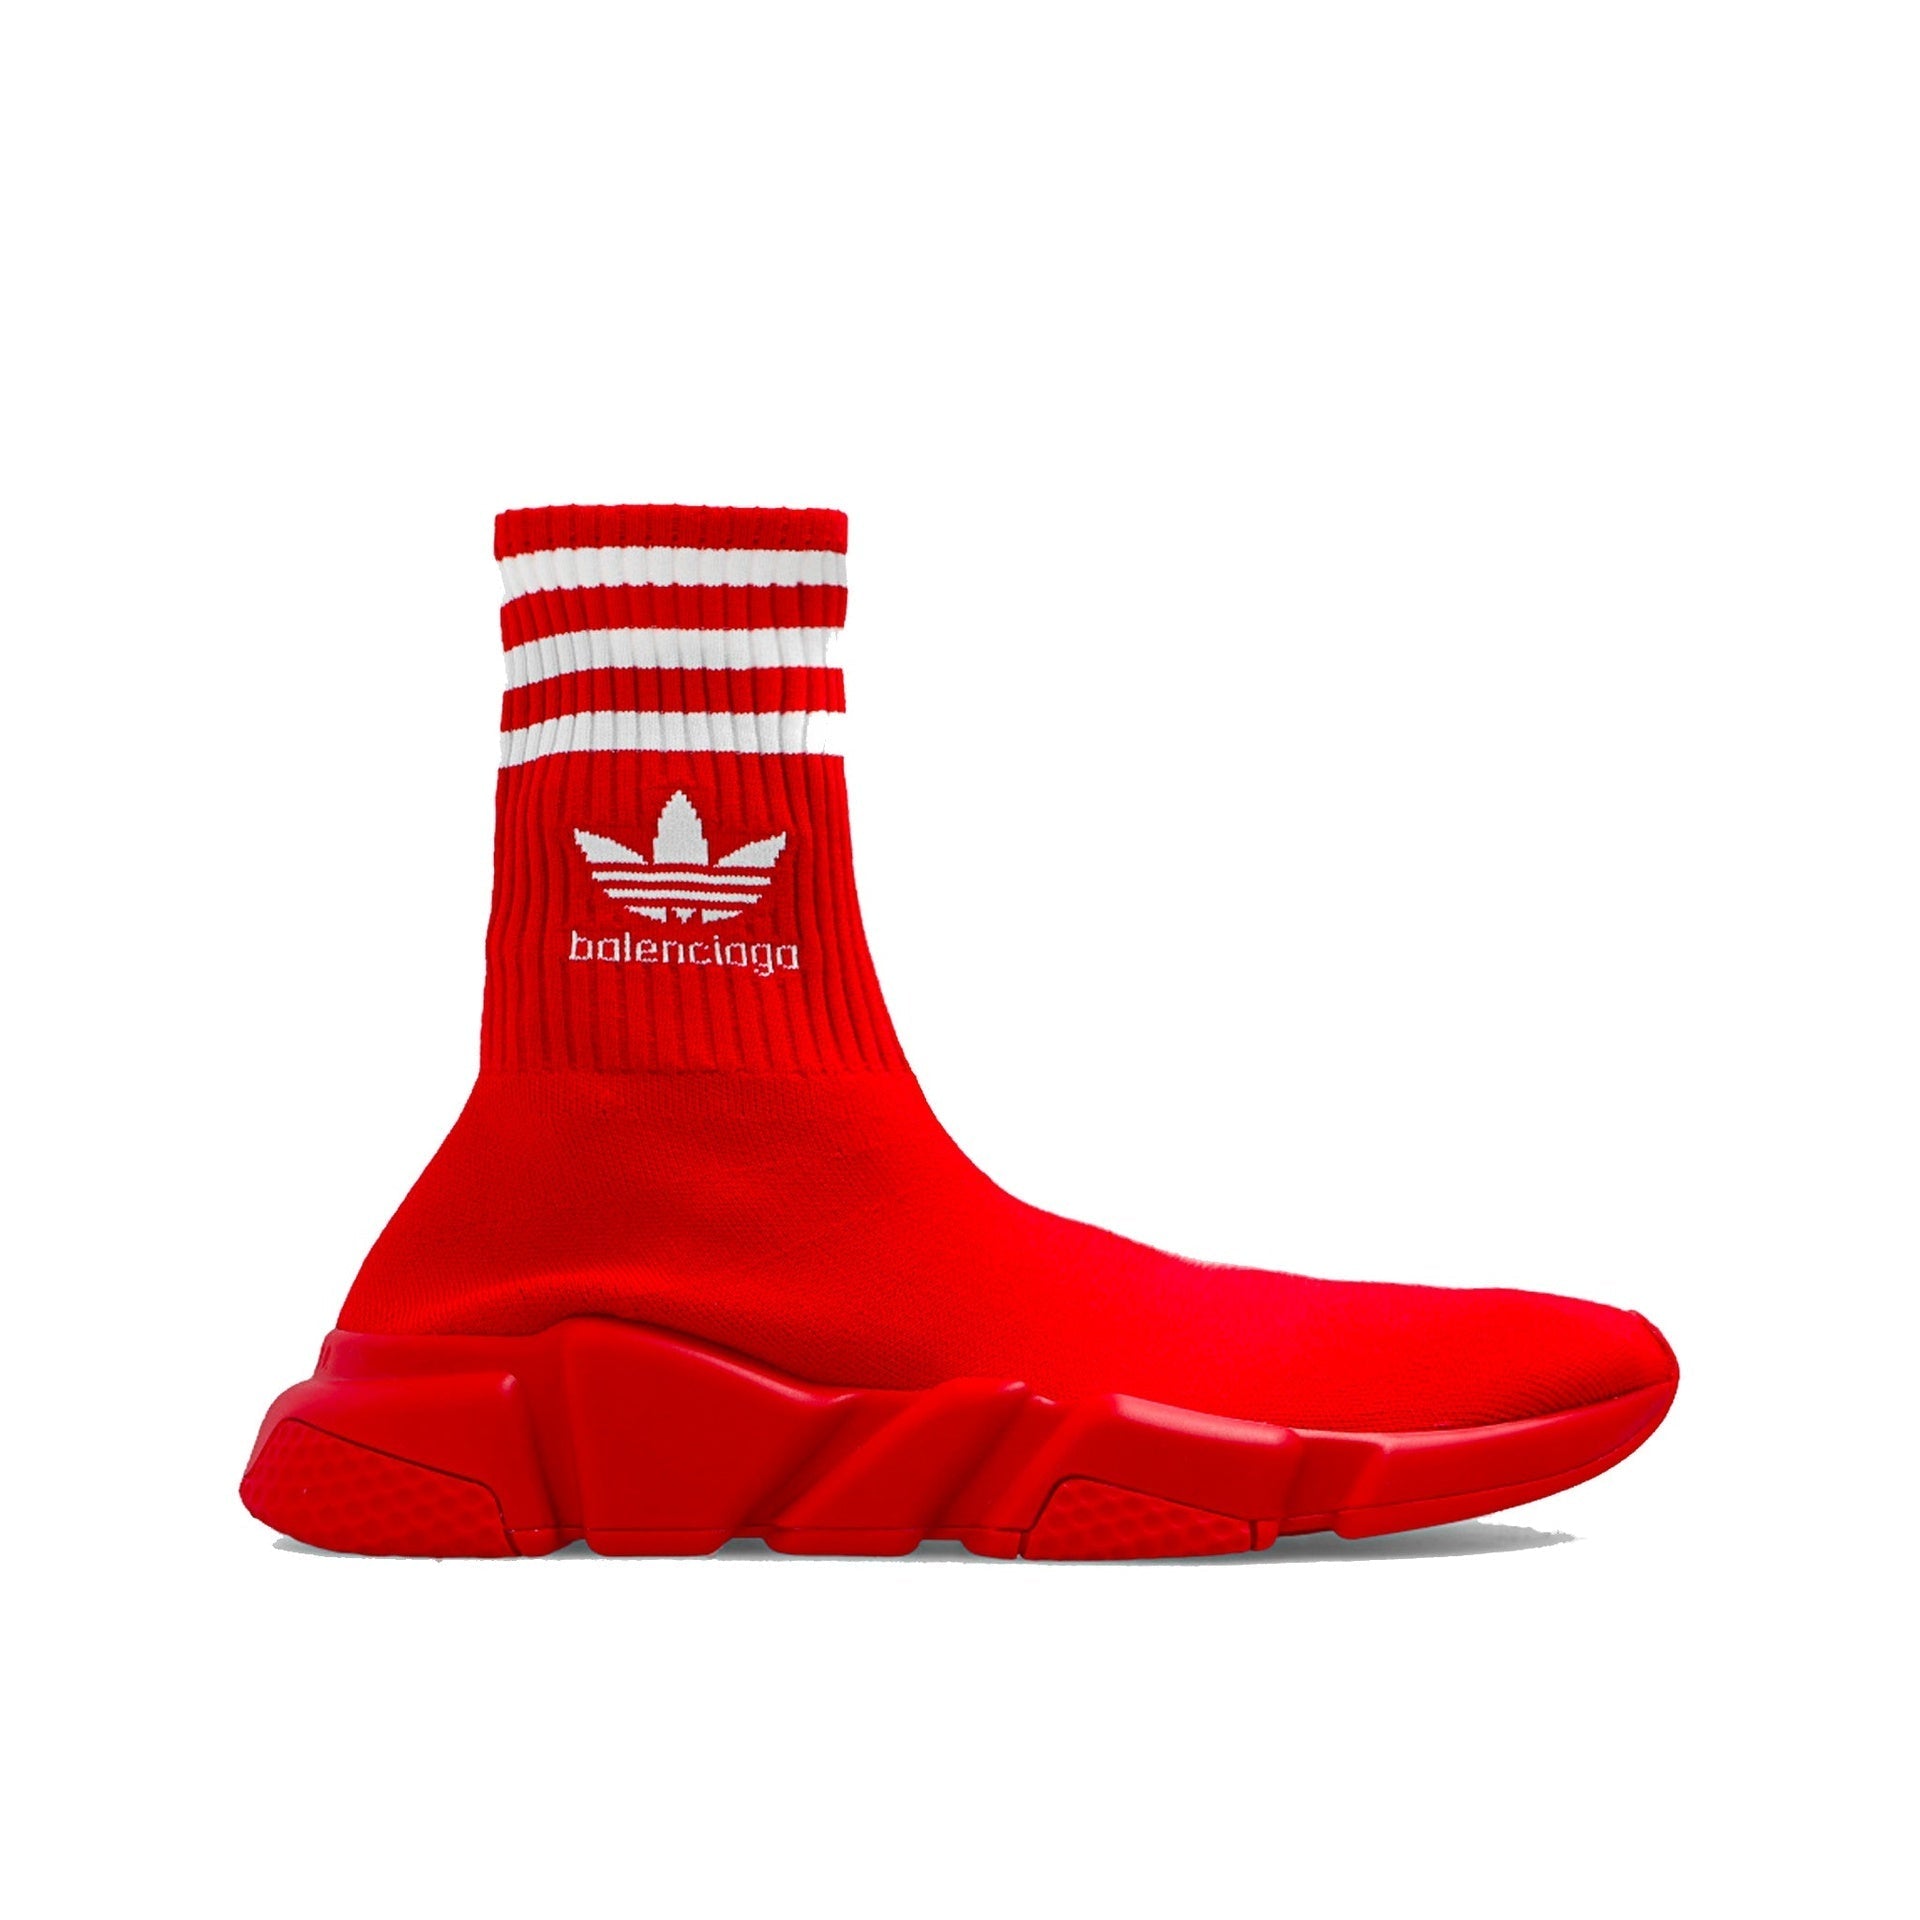 BALENCIAGA-X-ADIDAS-OUTLET-SALE-Balenciaga-X-Adidas-Speed-2_0-Lt-Sock-Sneakers-Sneakers-RED-35-ARCHIVE-COLLECTION.jpg